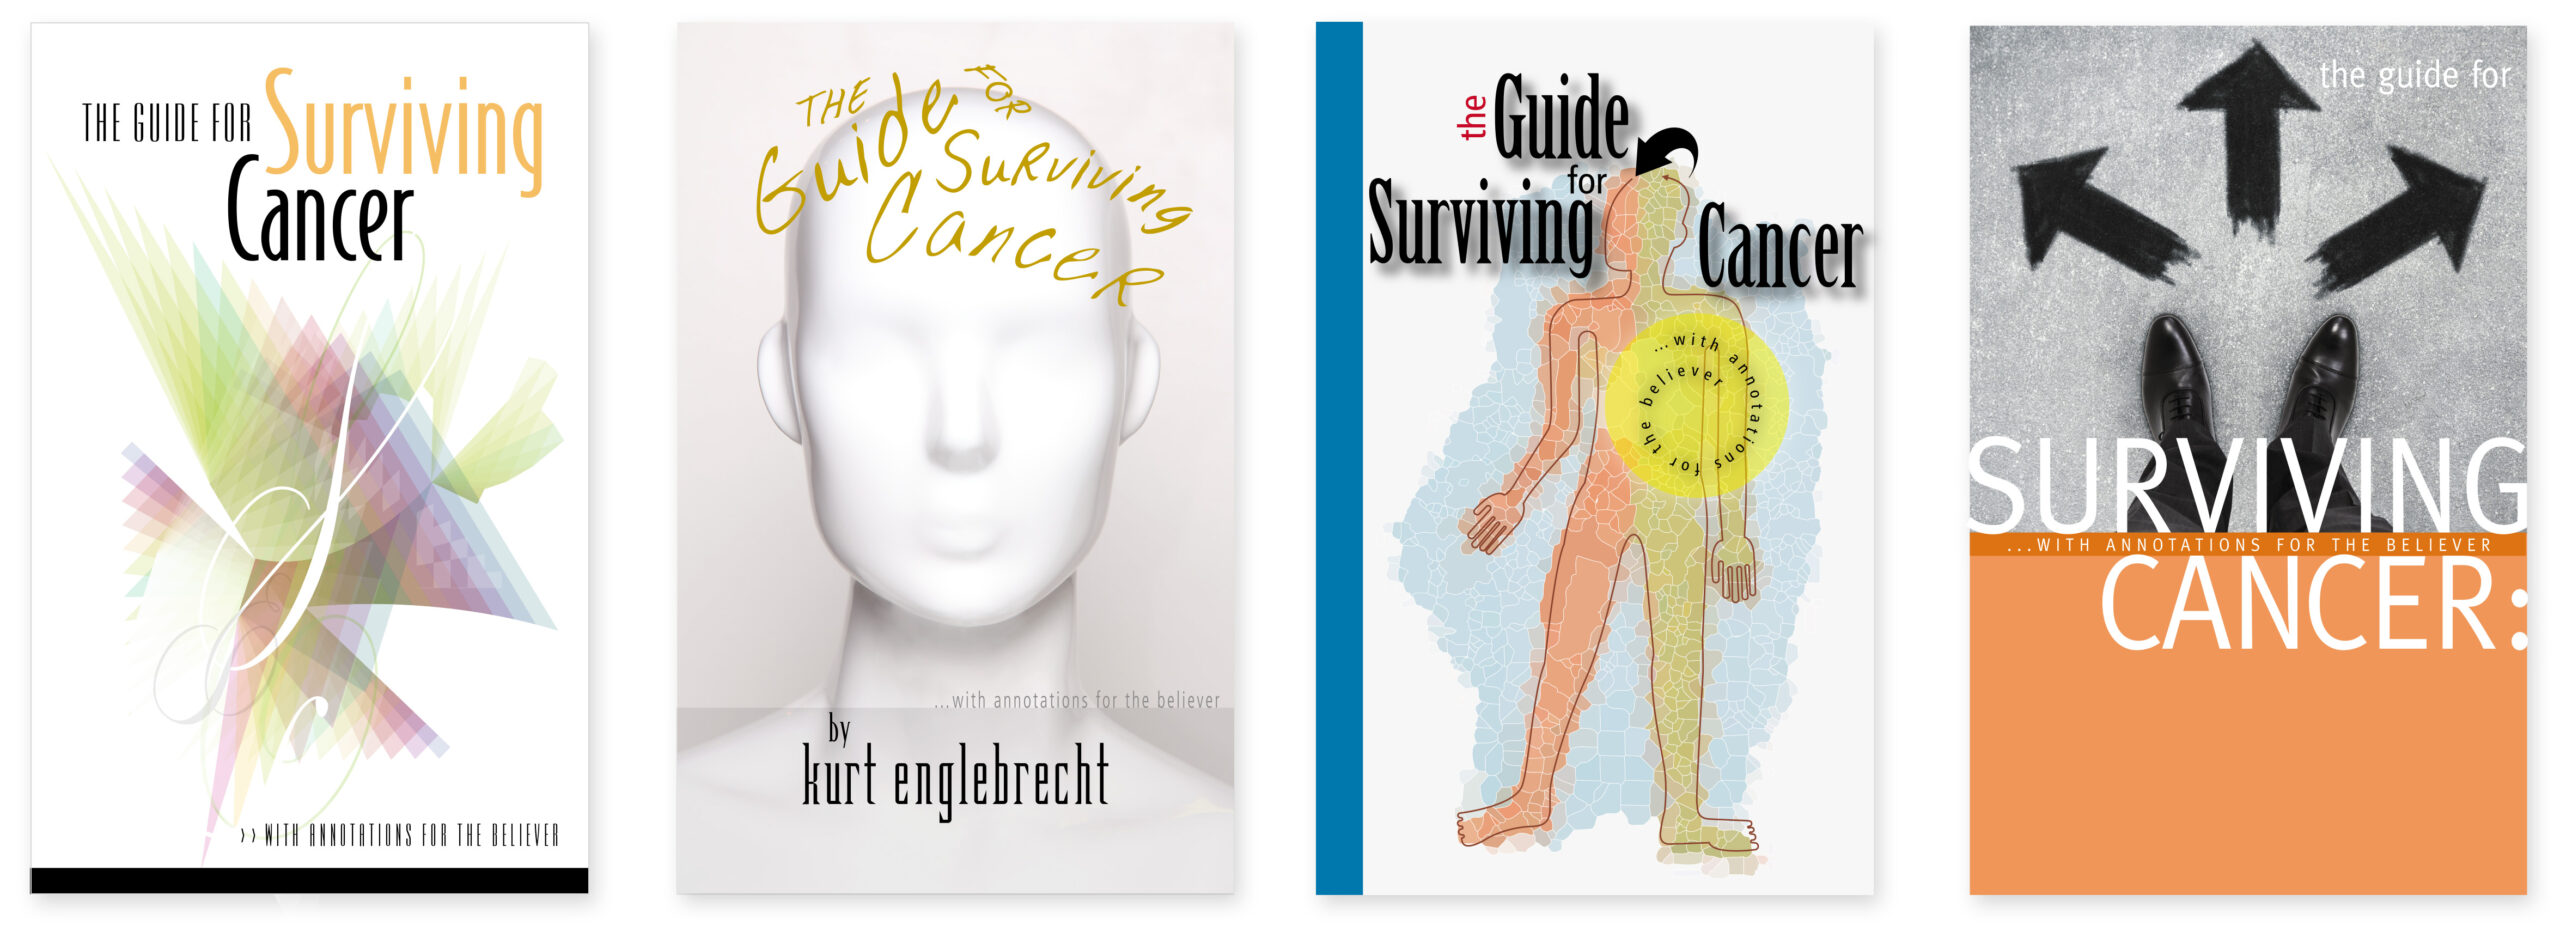 Surviving Cancer book covers